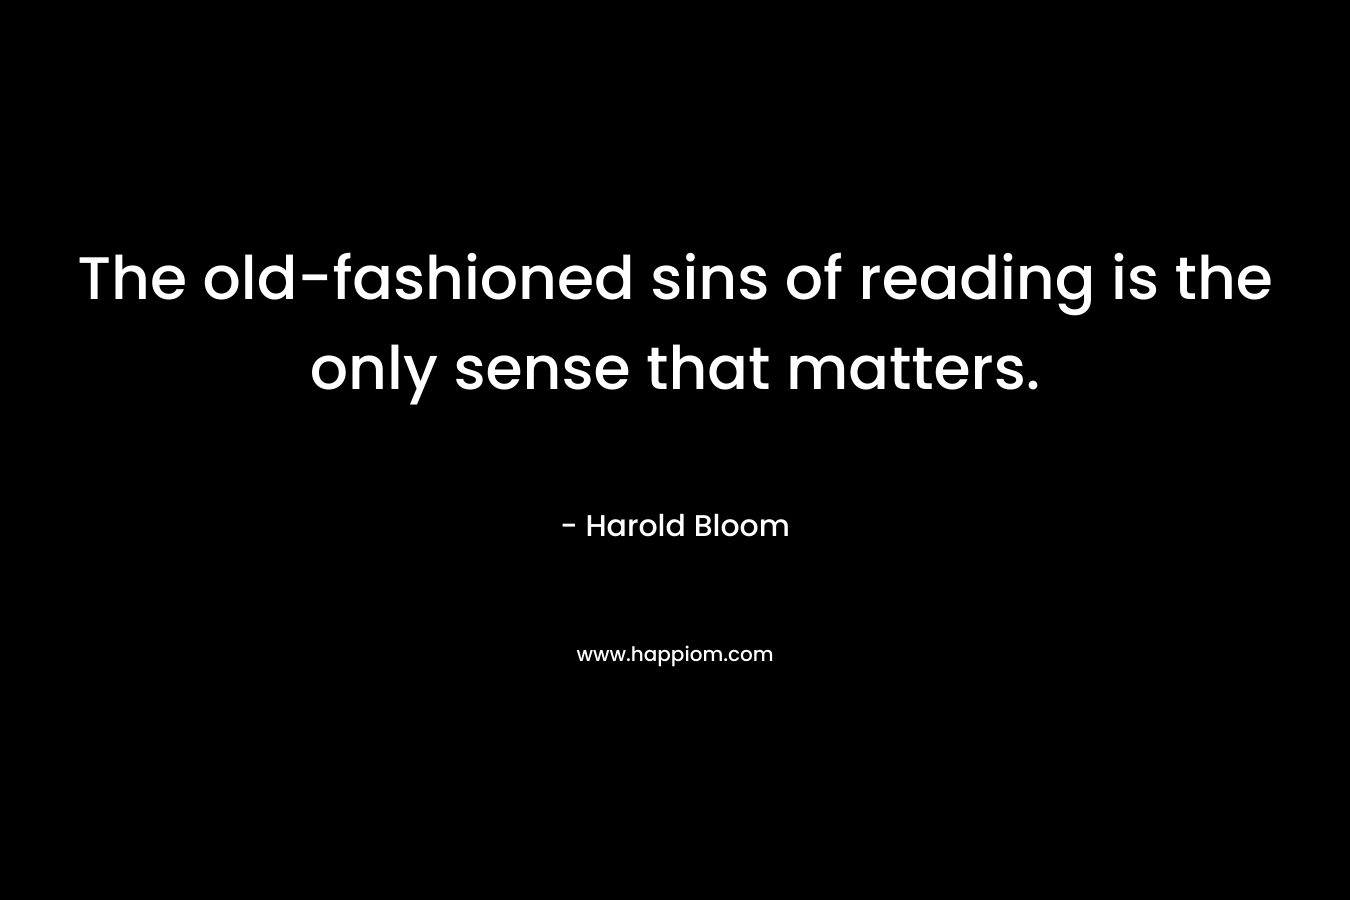 The old-fashioned sins of reading is the only sense that matters. – Harold Bloom